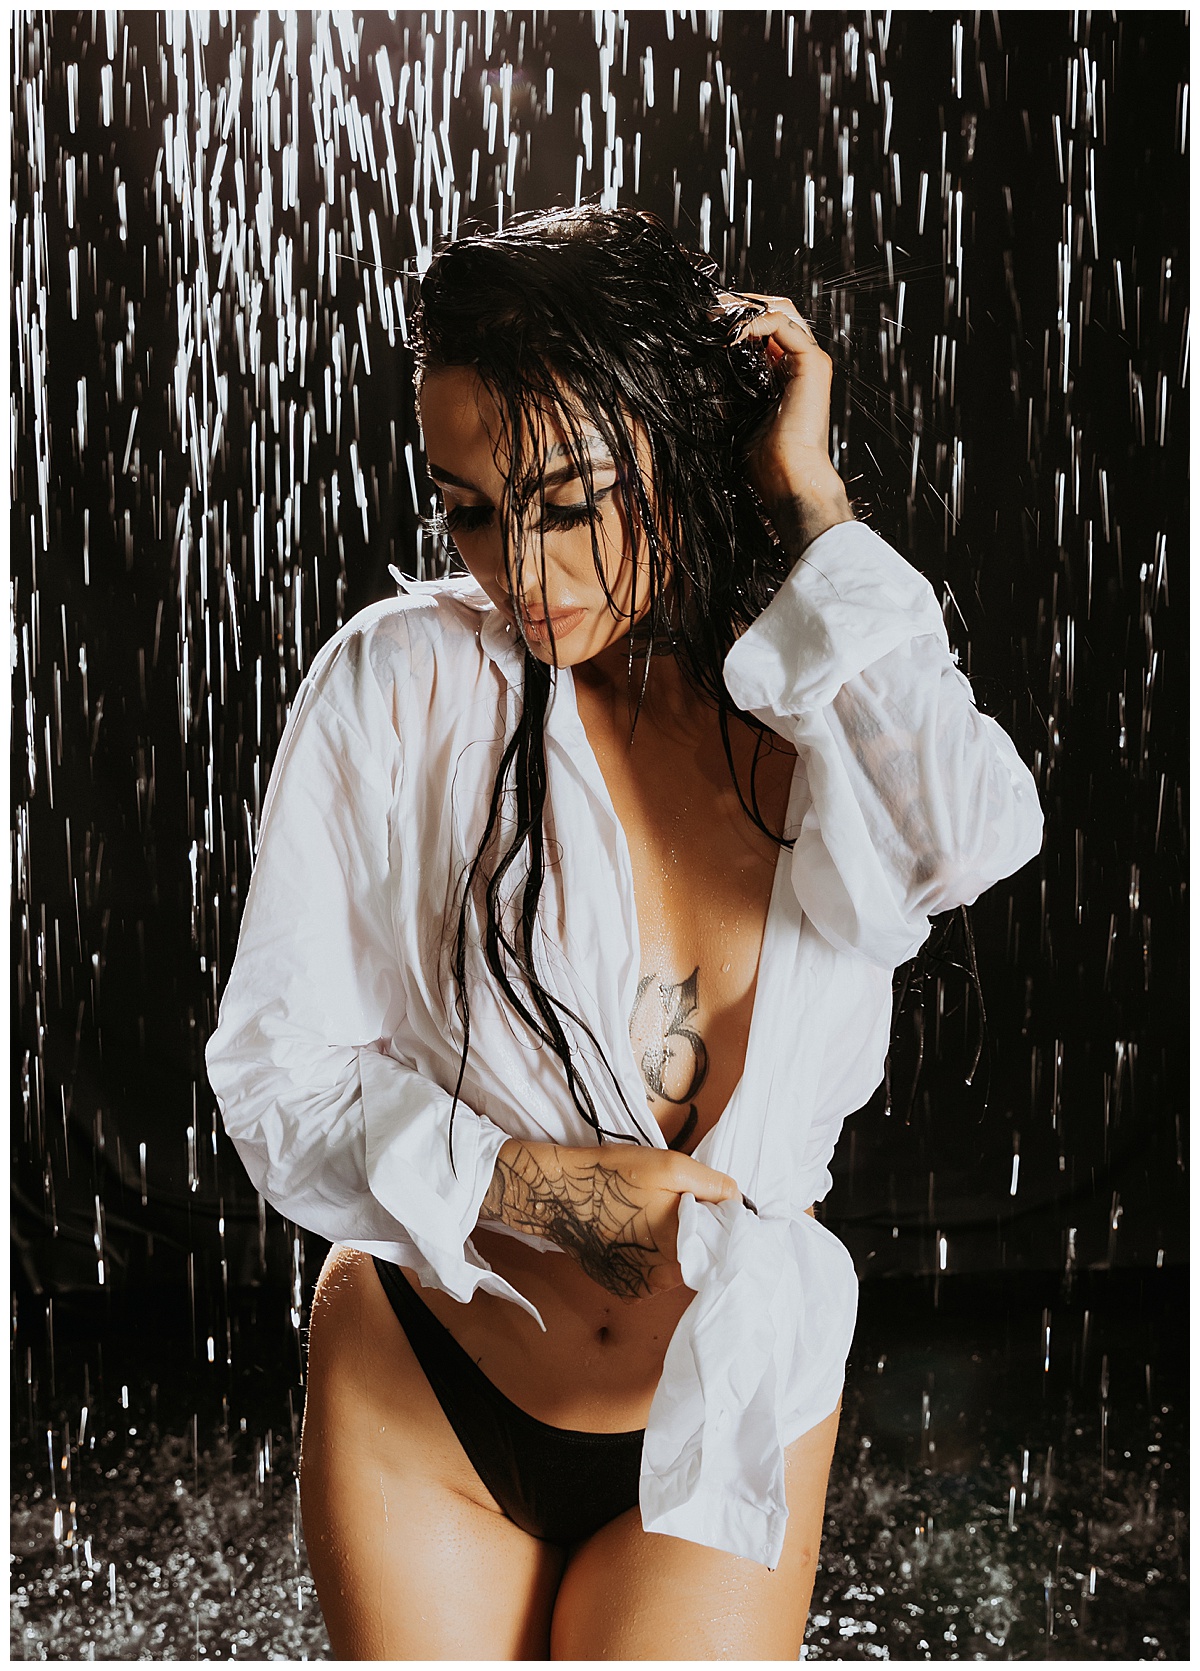 Lady in white shirt in rain for Add On Experiences